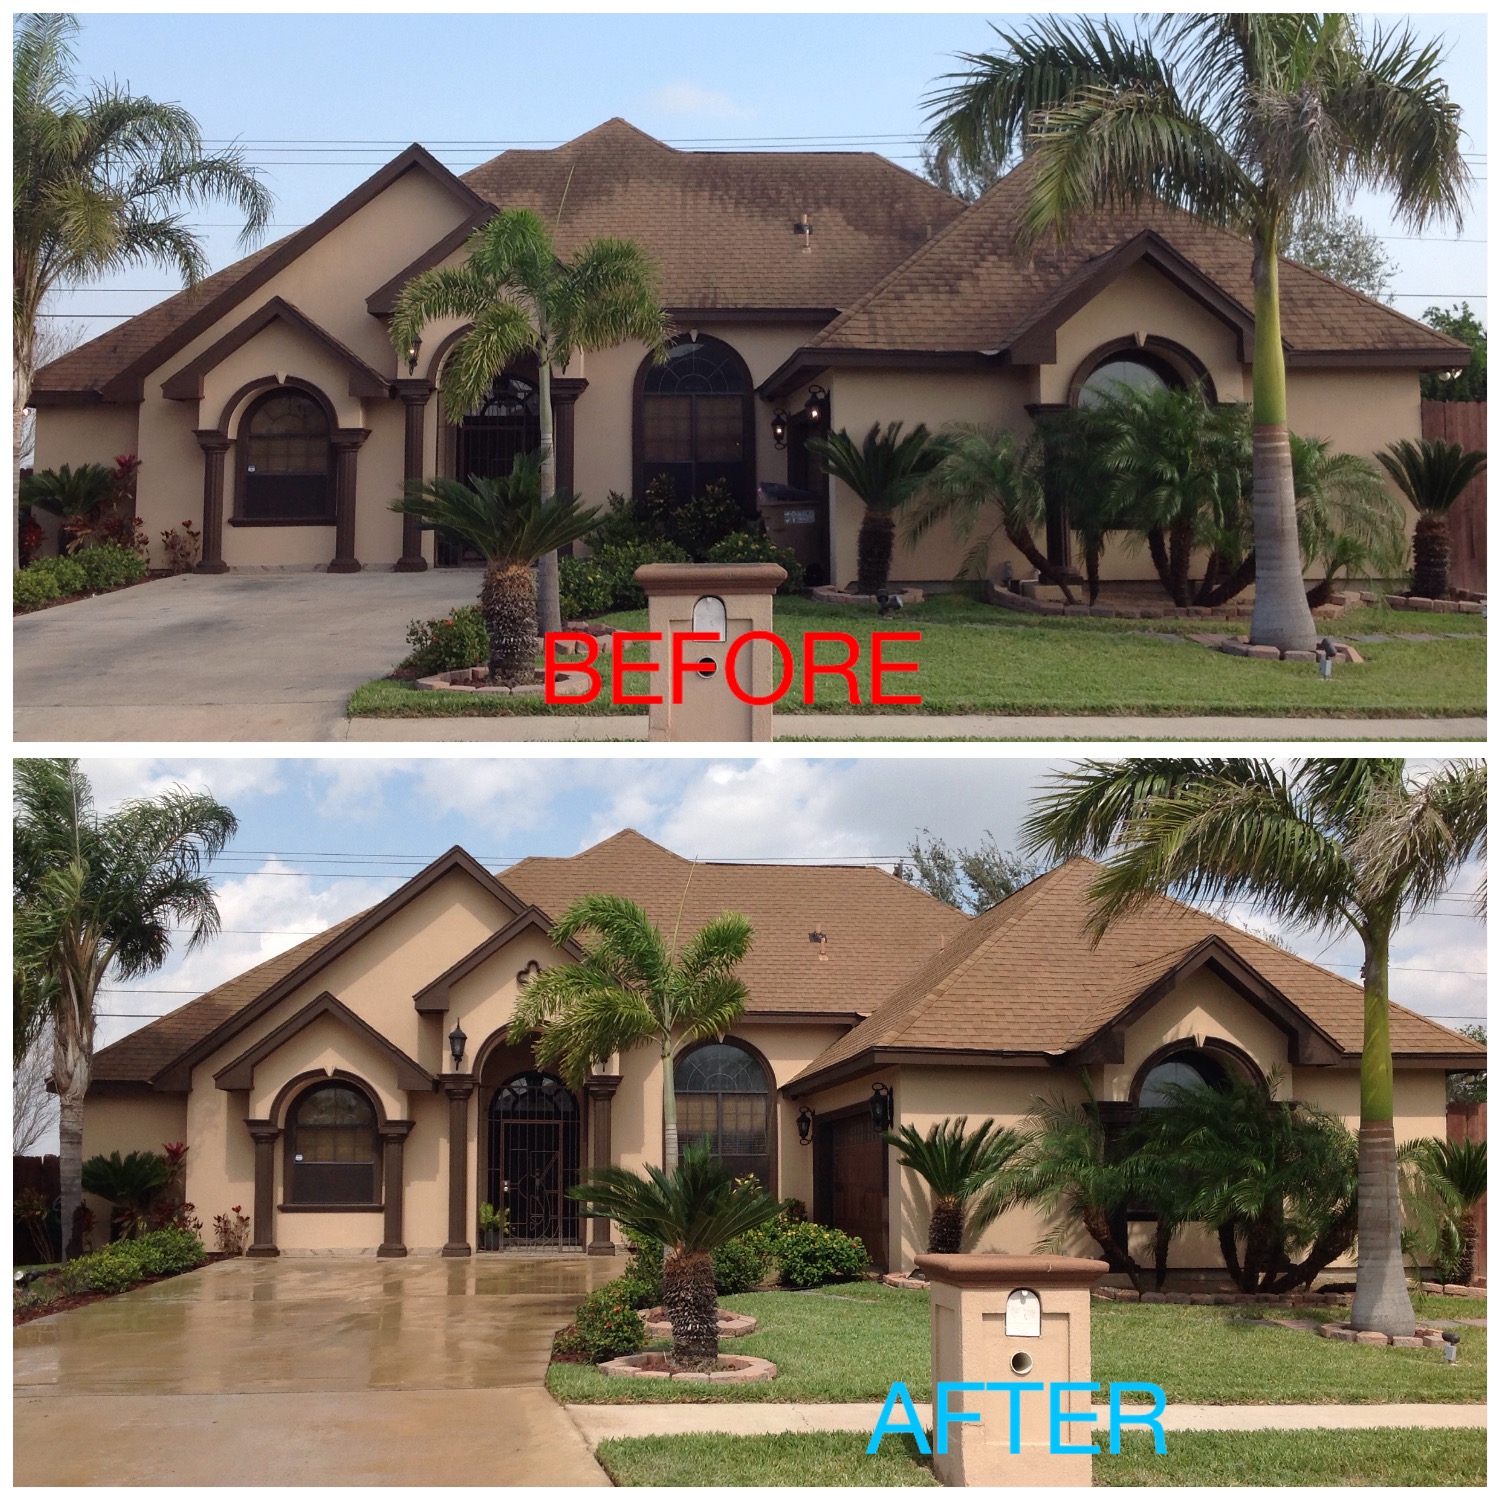 Hidalgo Roof & Exterior SoftWash offers low-pressure roof cleaning in south Texas that will keep your roof looking its best. No other method gives you top results without putting your roof in harm's way.